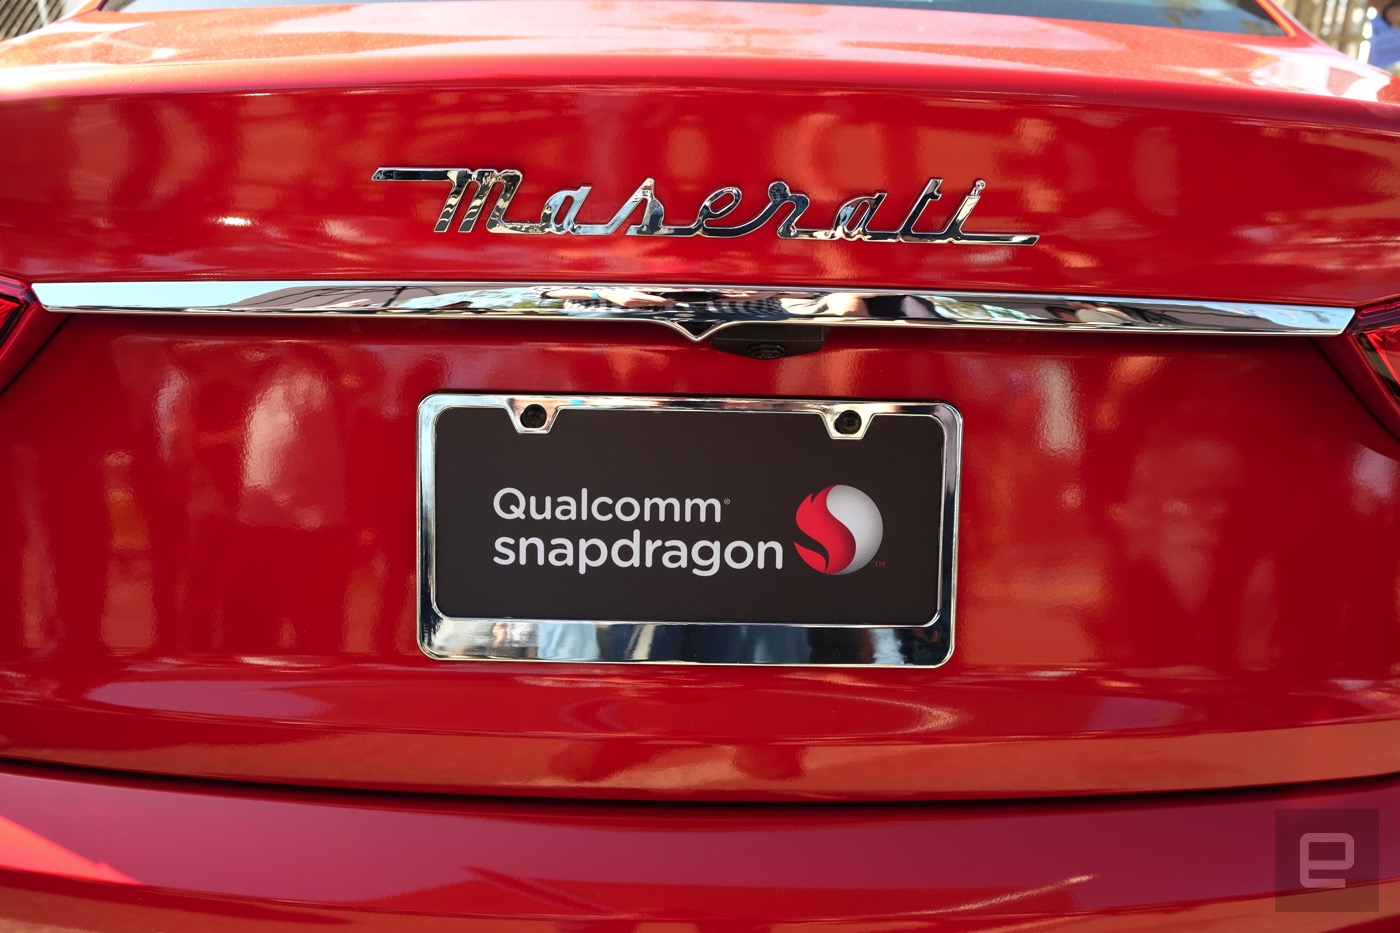 Google and Qualcomm put Android Auto in charge of this Maserati